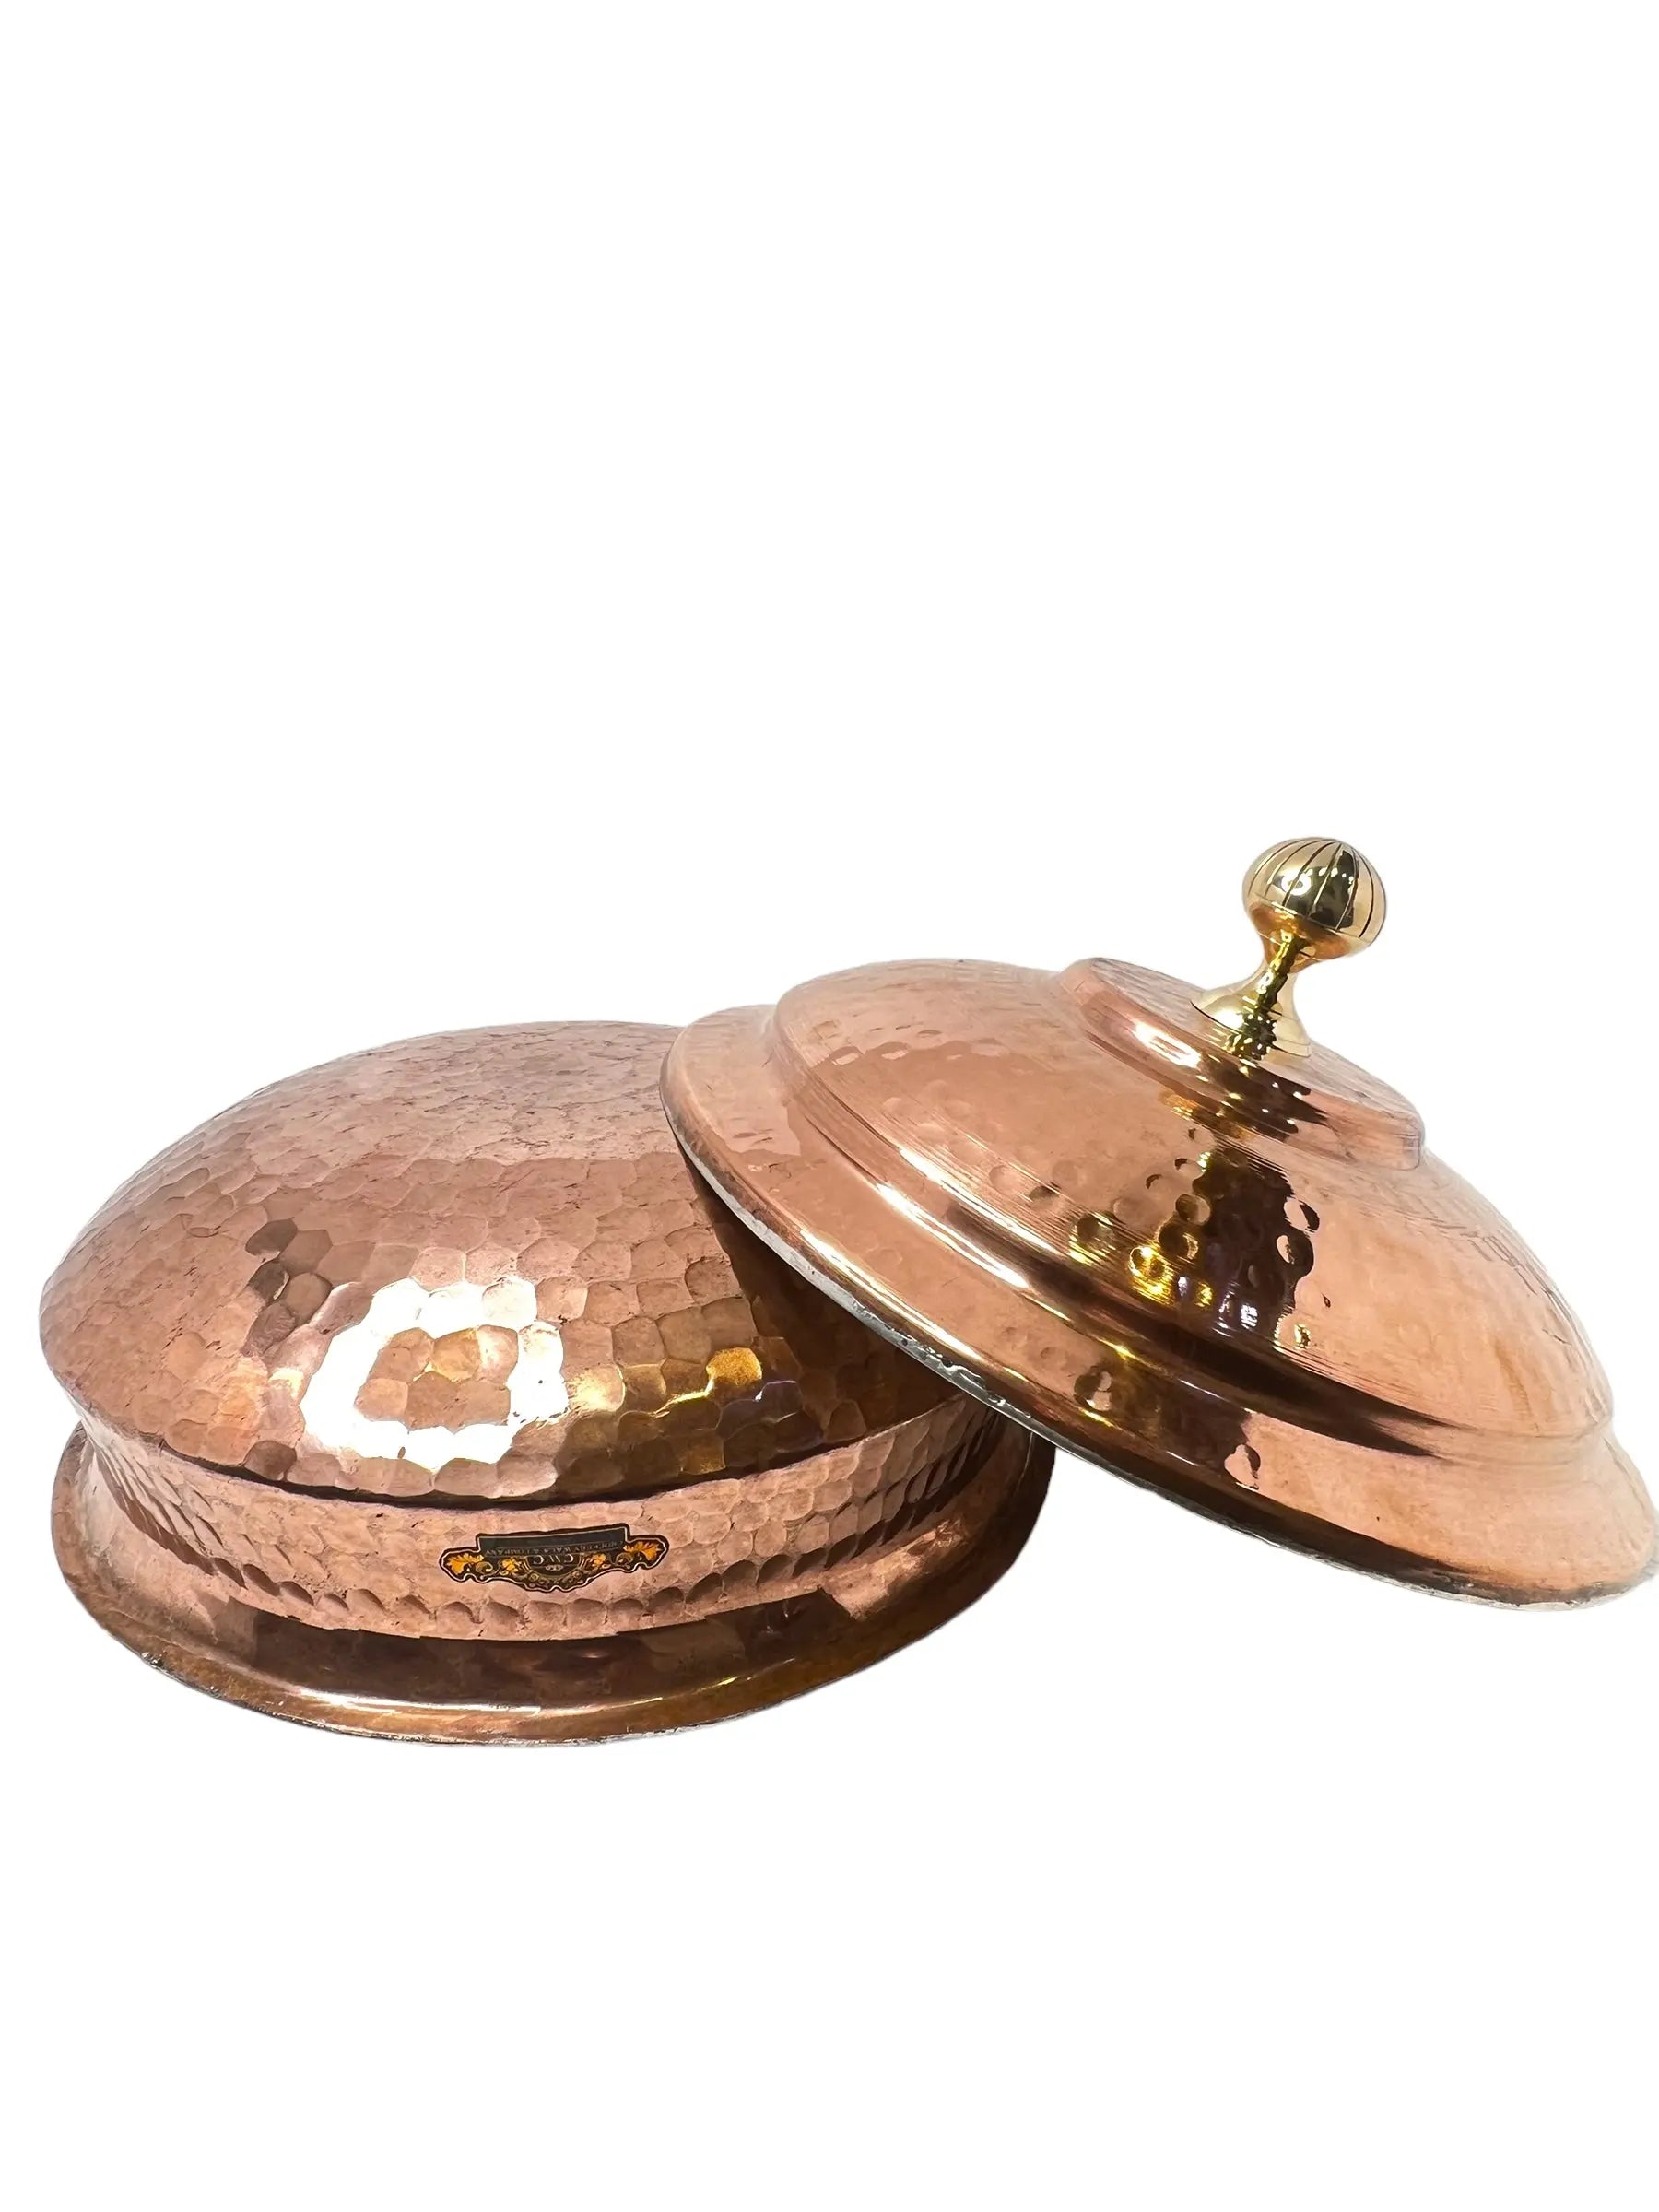 Pure Copper Handi Lagan With Copper Lid For Cooking - CROCKERY WALA AND COMPANY 